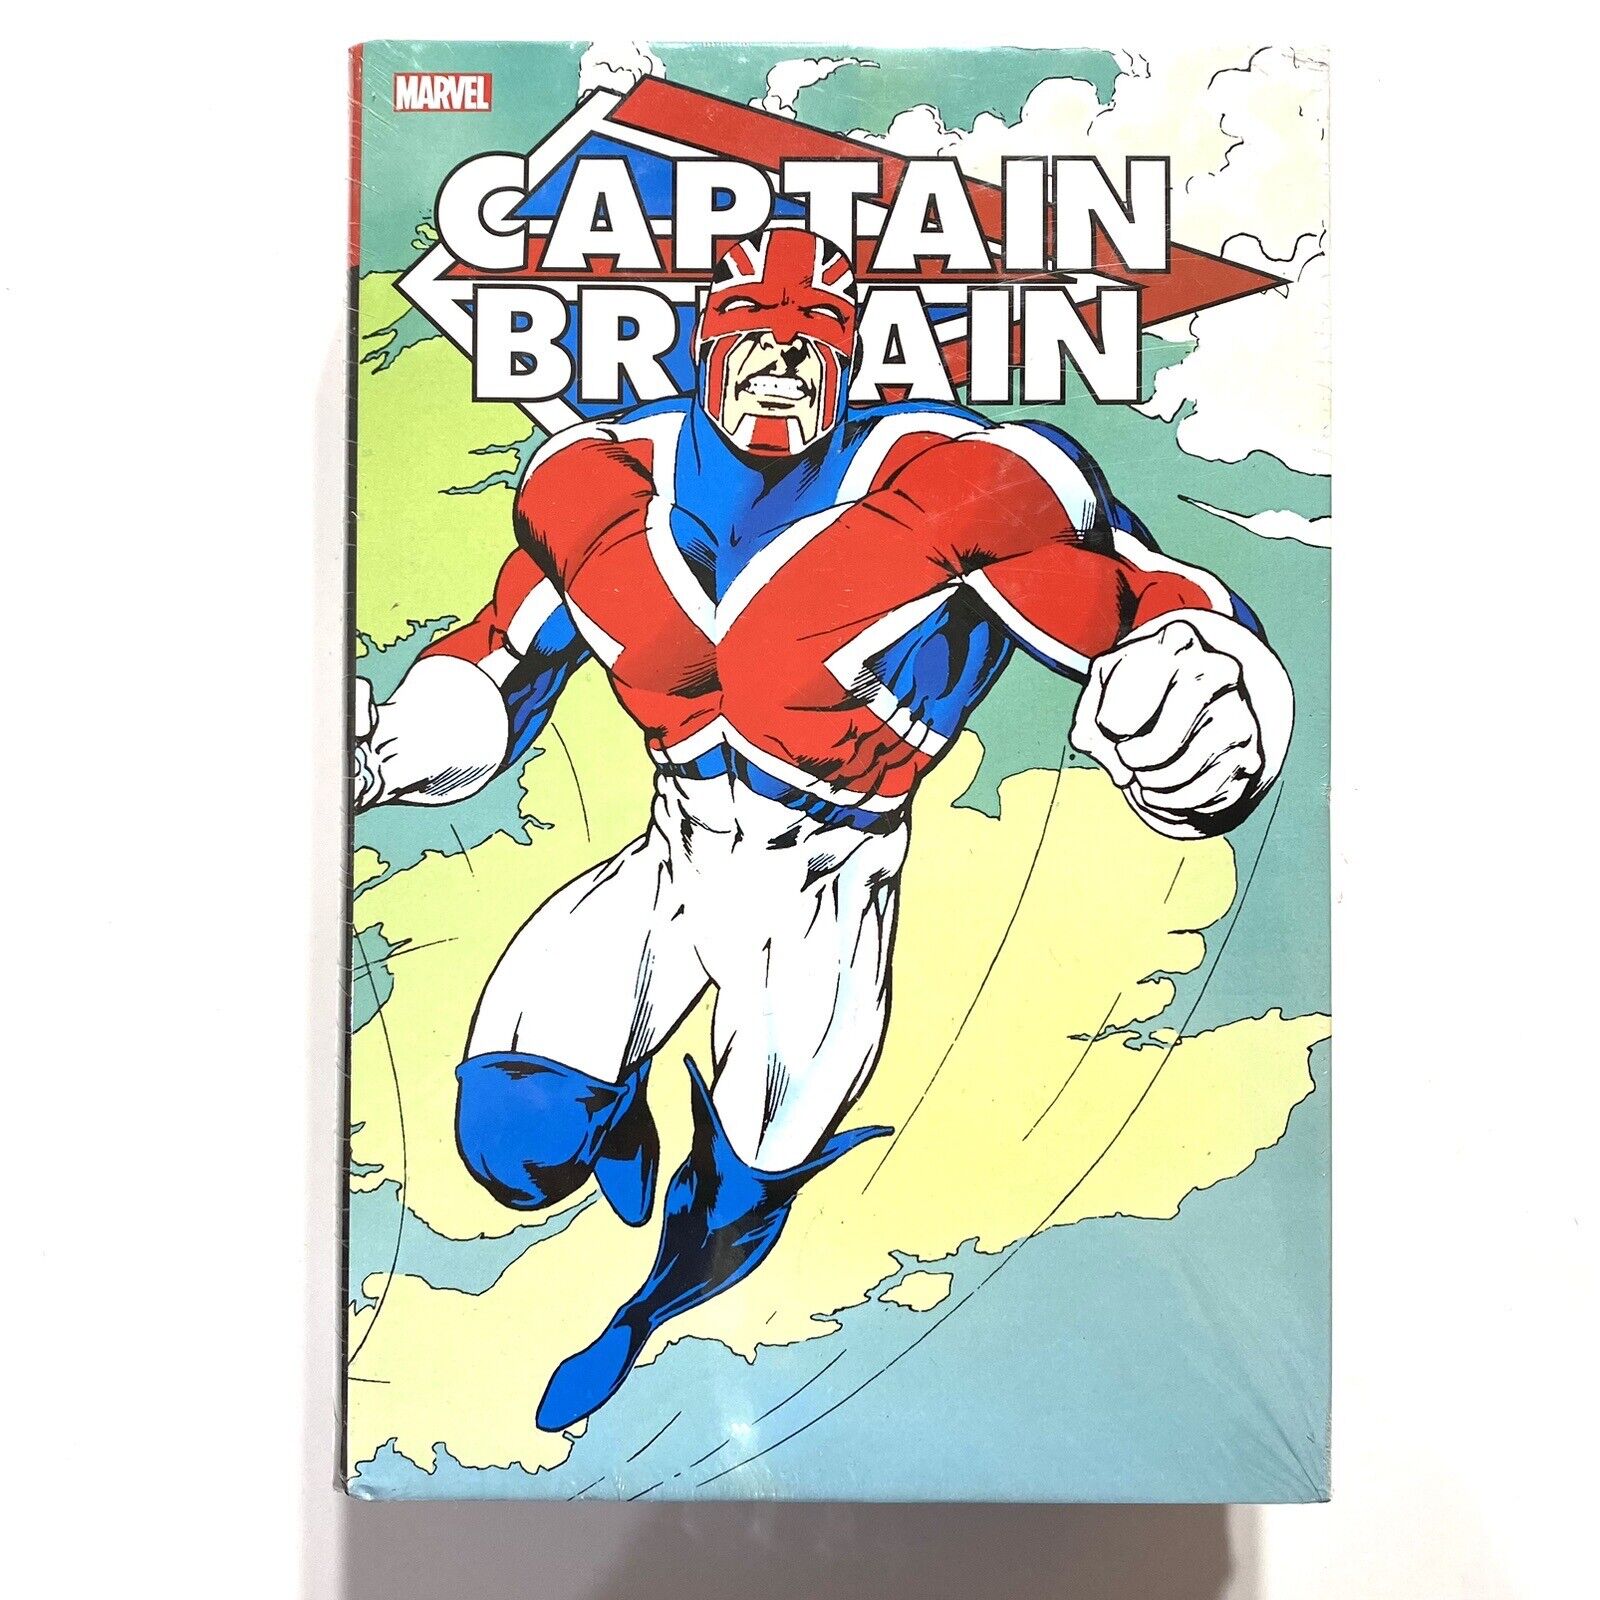 Captain Britain Omnibus New Sealed Hardcover $5 Flat Combined Shipping